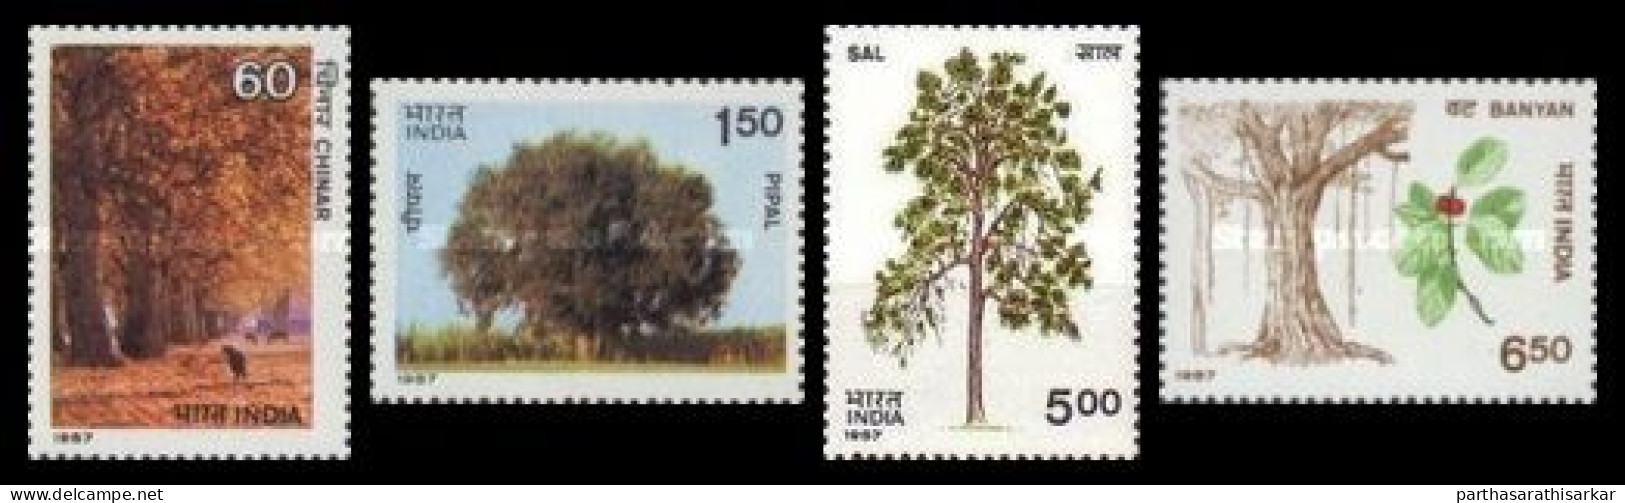 INDIA 1987 INDIAN TREES NATURE COMPLETE SET MNH - Unused Stamps